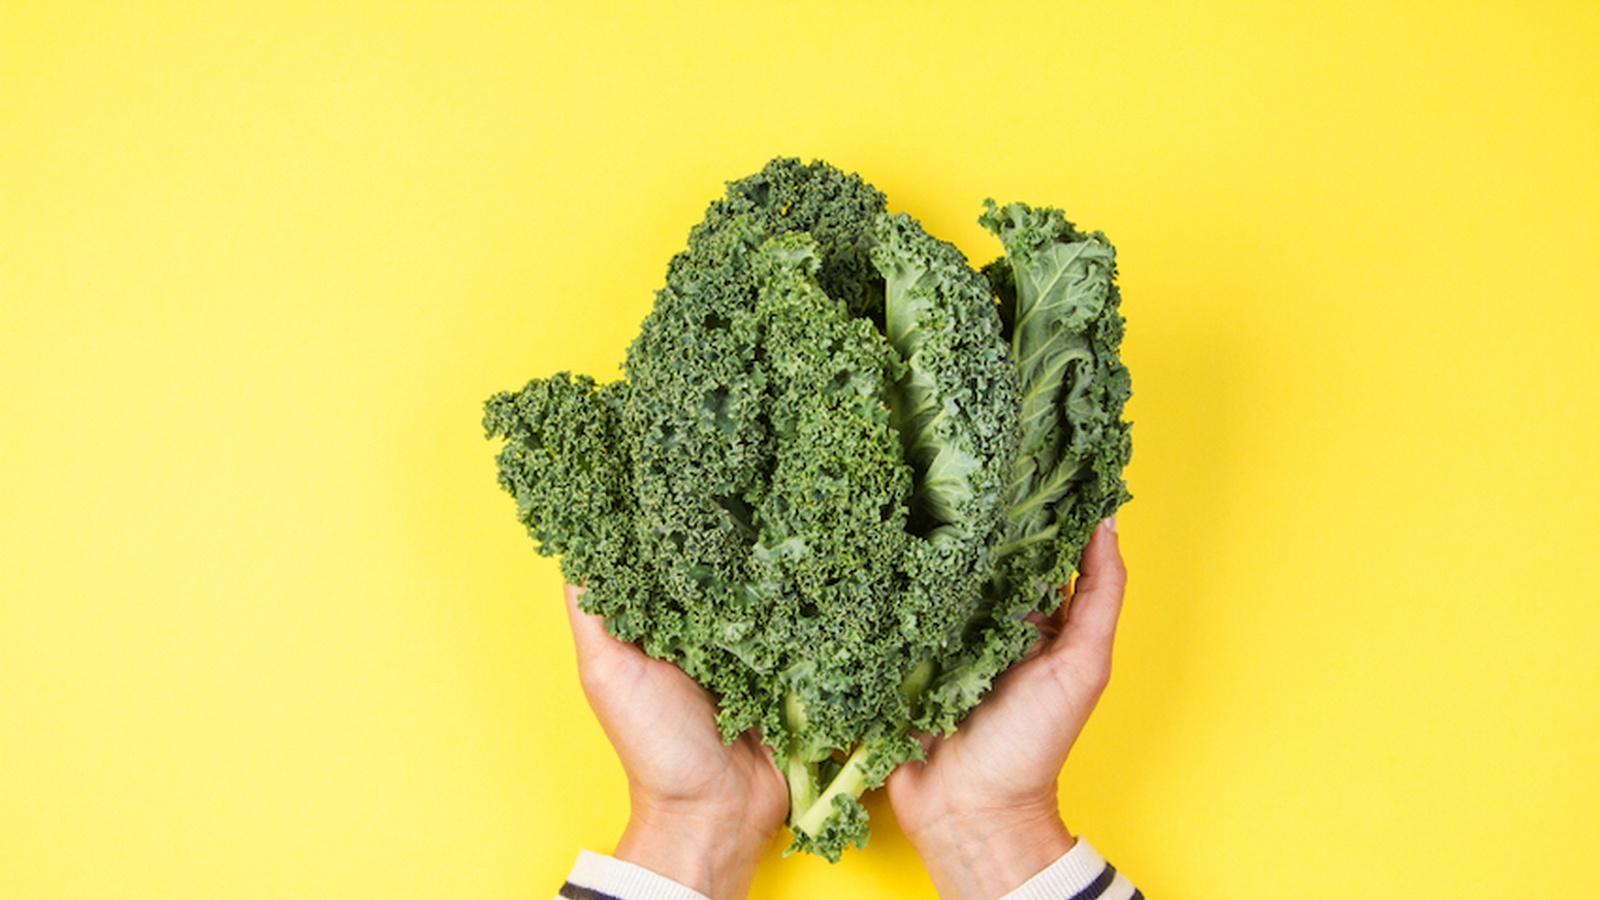 EWG's 2019 Dirty Dozen List: Which New Vegetable Made It To The List?